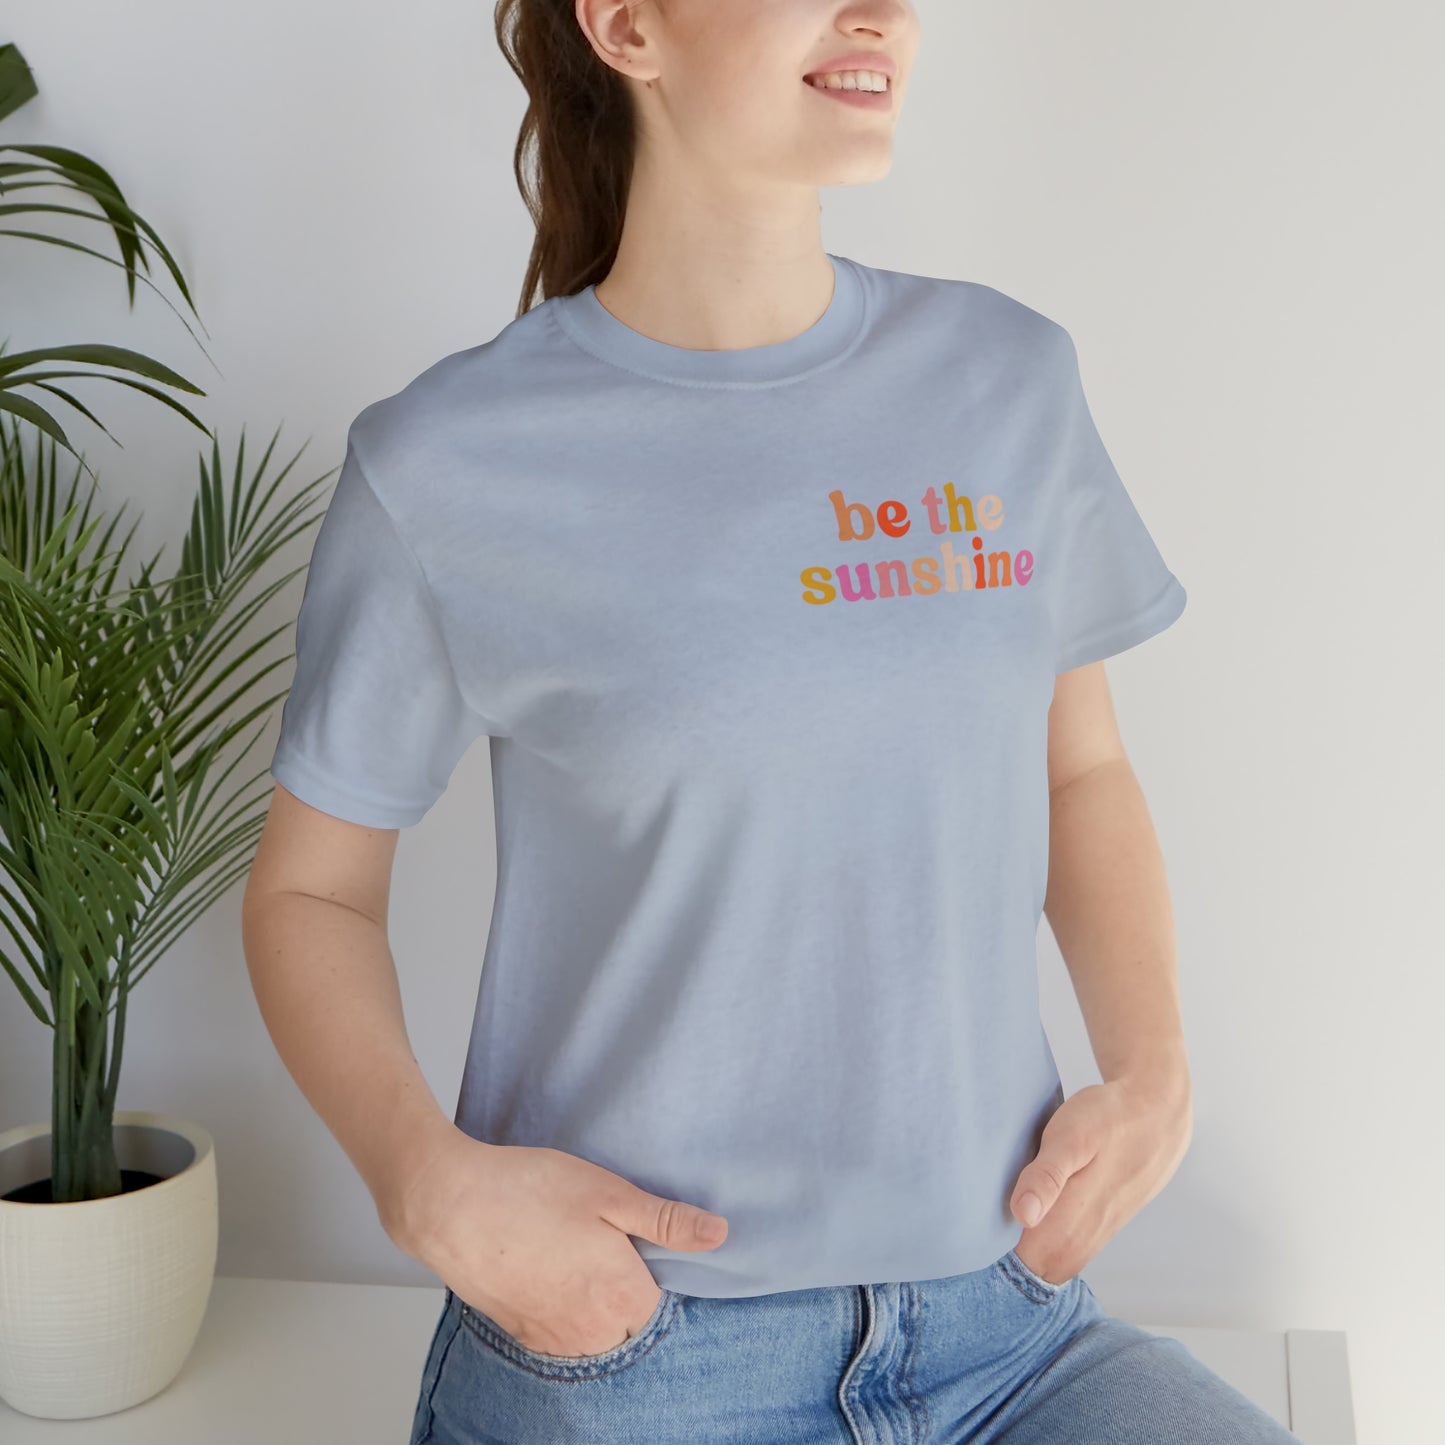 Be The Sunshine Shirt, Retro Positive Vibes Motivational T-Shirt for Birthday Gift , Cute Inspirational T-shirt for Her, T403